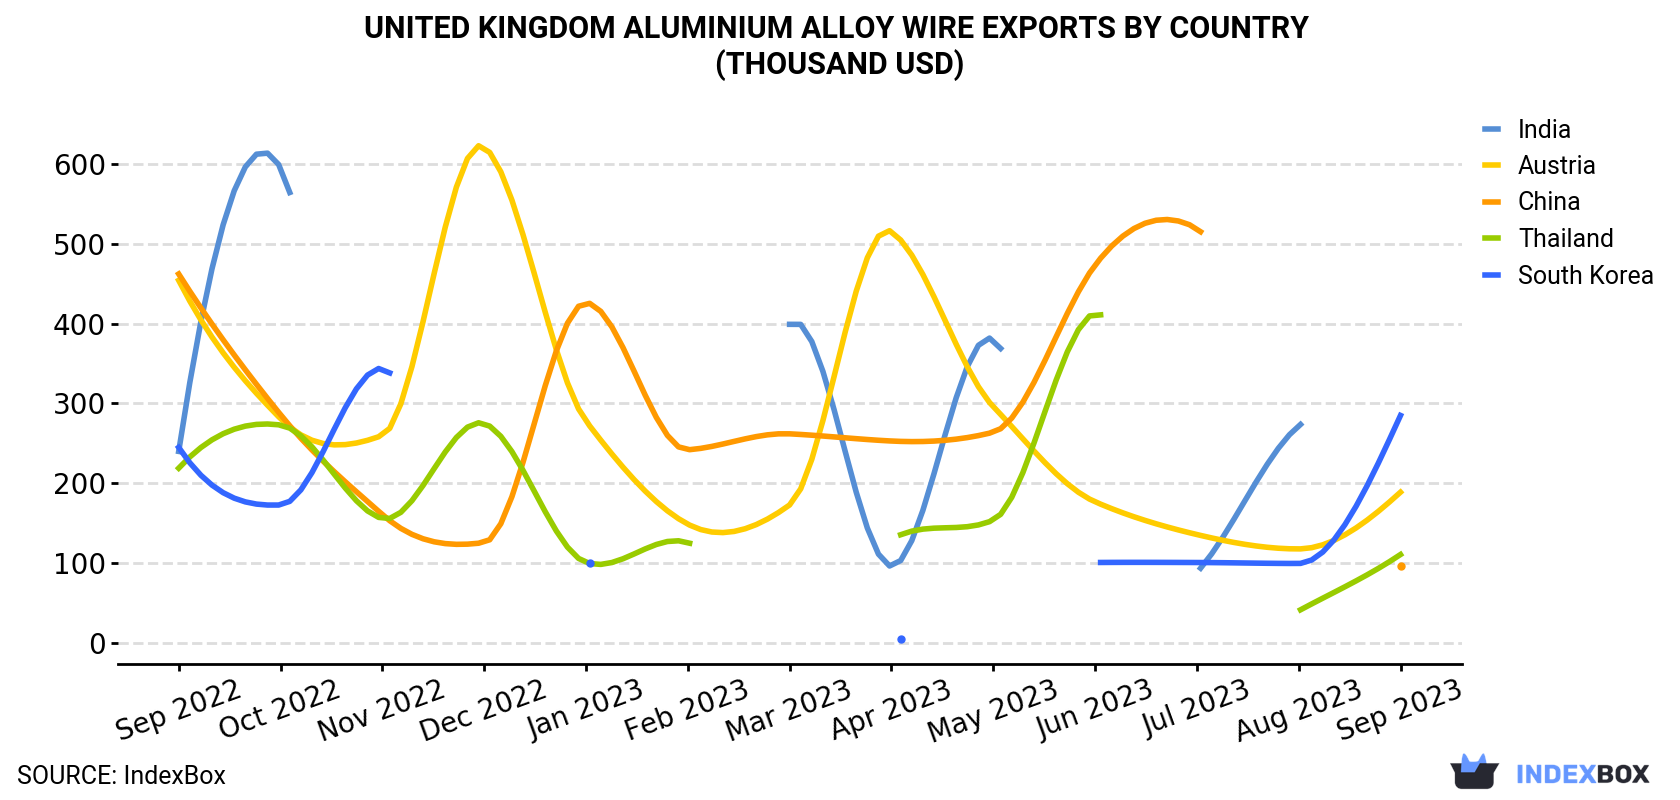 United Kingdom Aluminium Alloy Wire Exports By Country (Thousand USD)